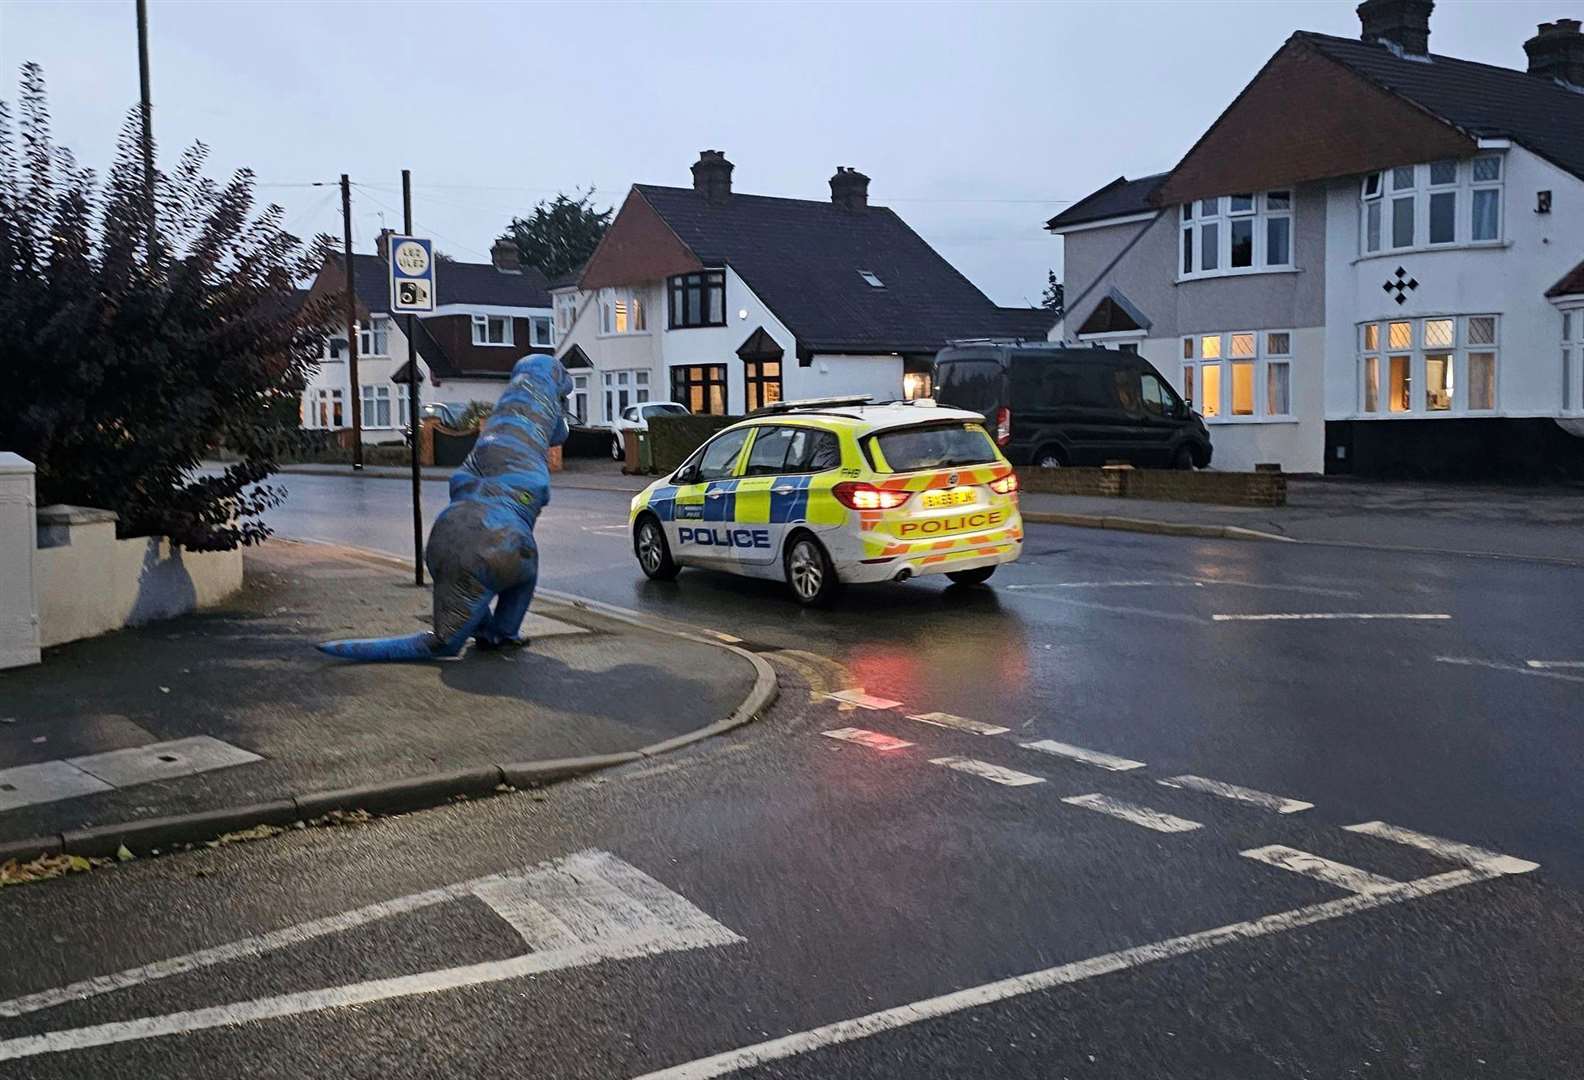 A dinosaur appears to catch the eye of police on patrol. Picture: Paul Sullivan